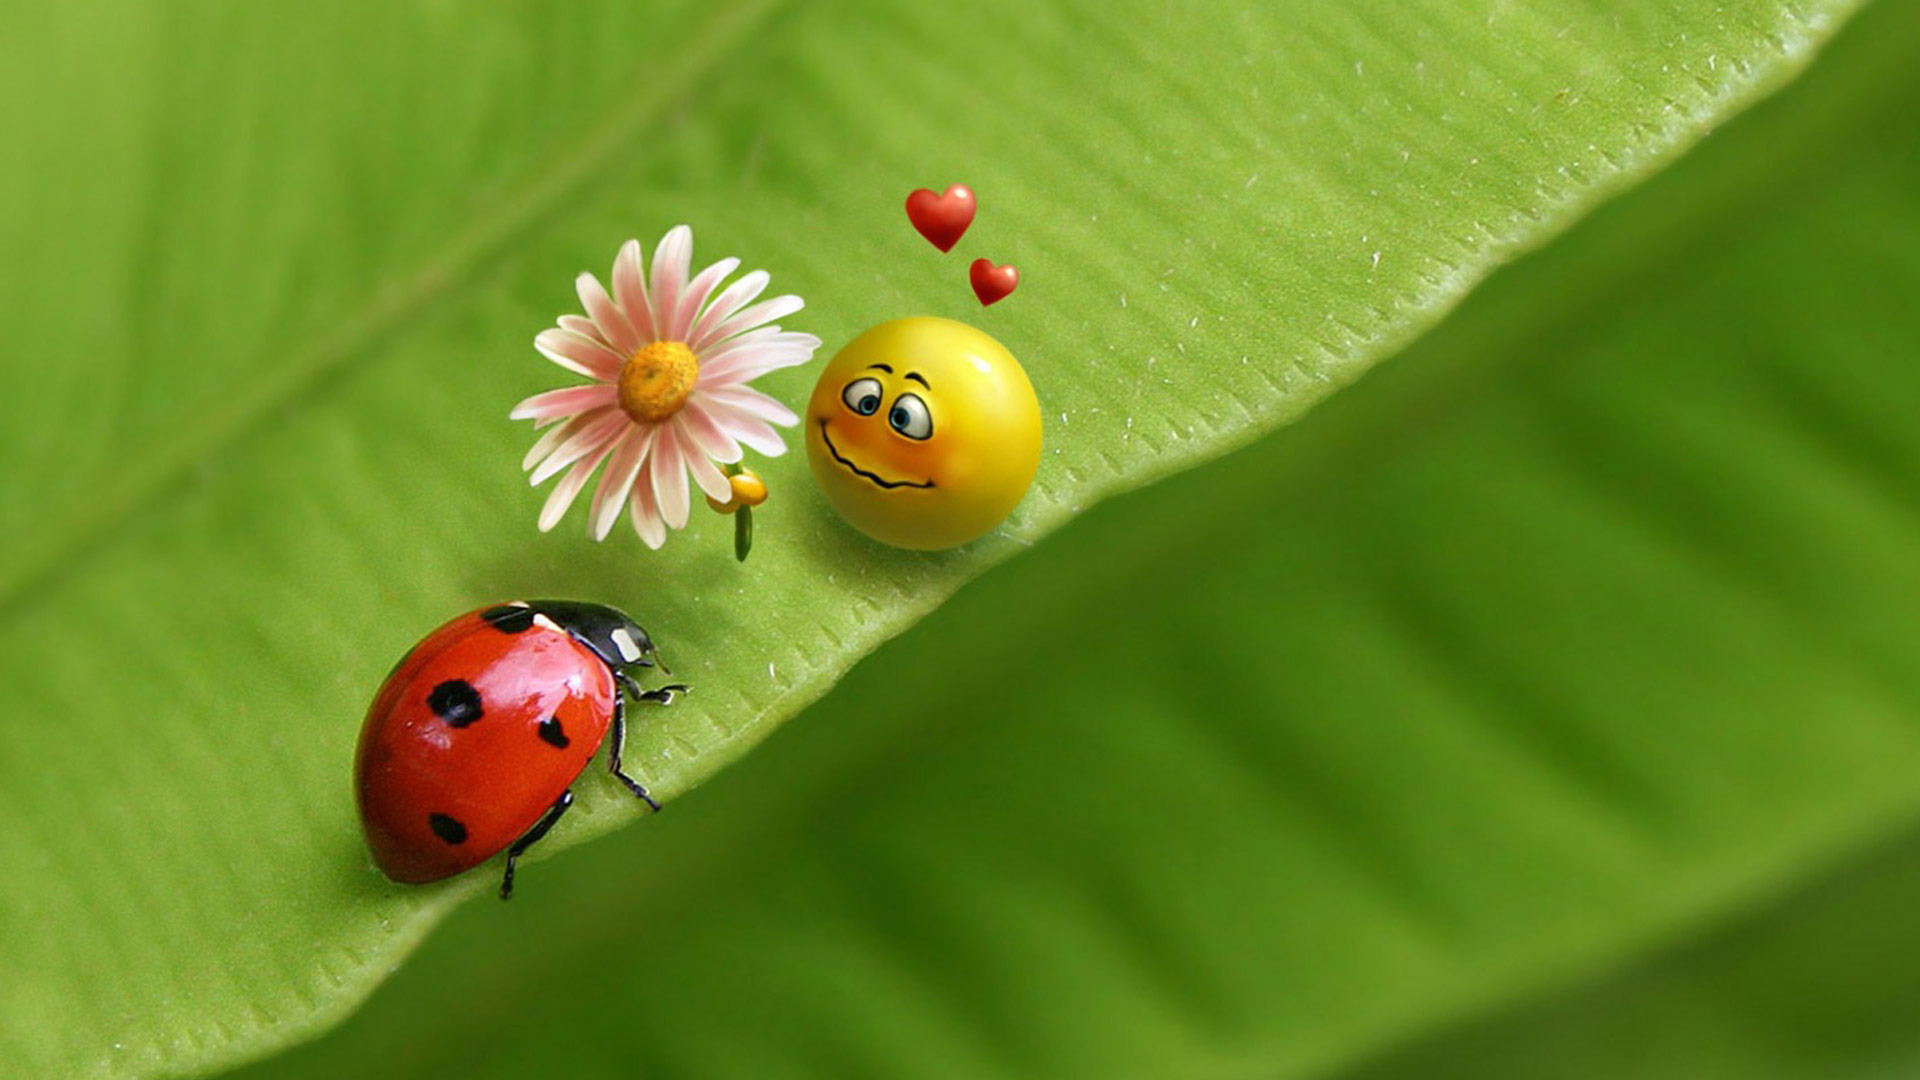 Ladybug And Smiley Face In Love Wallpaper MixHD